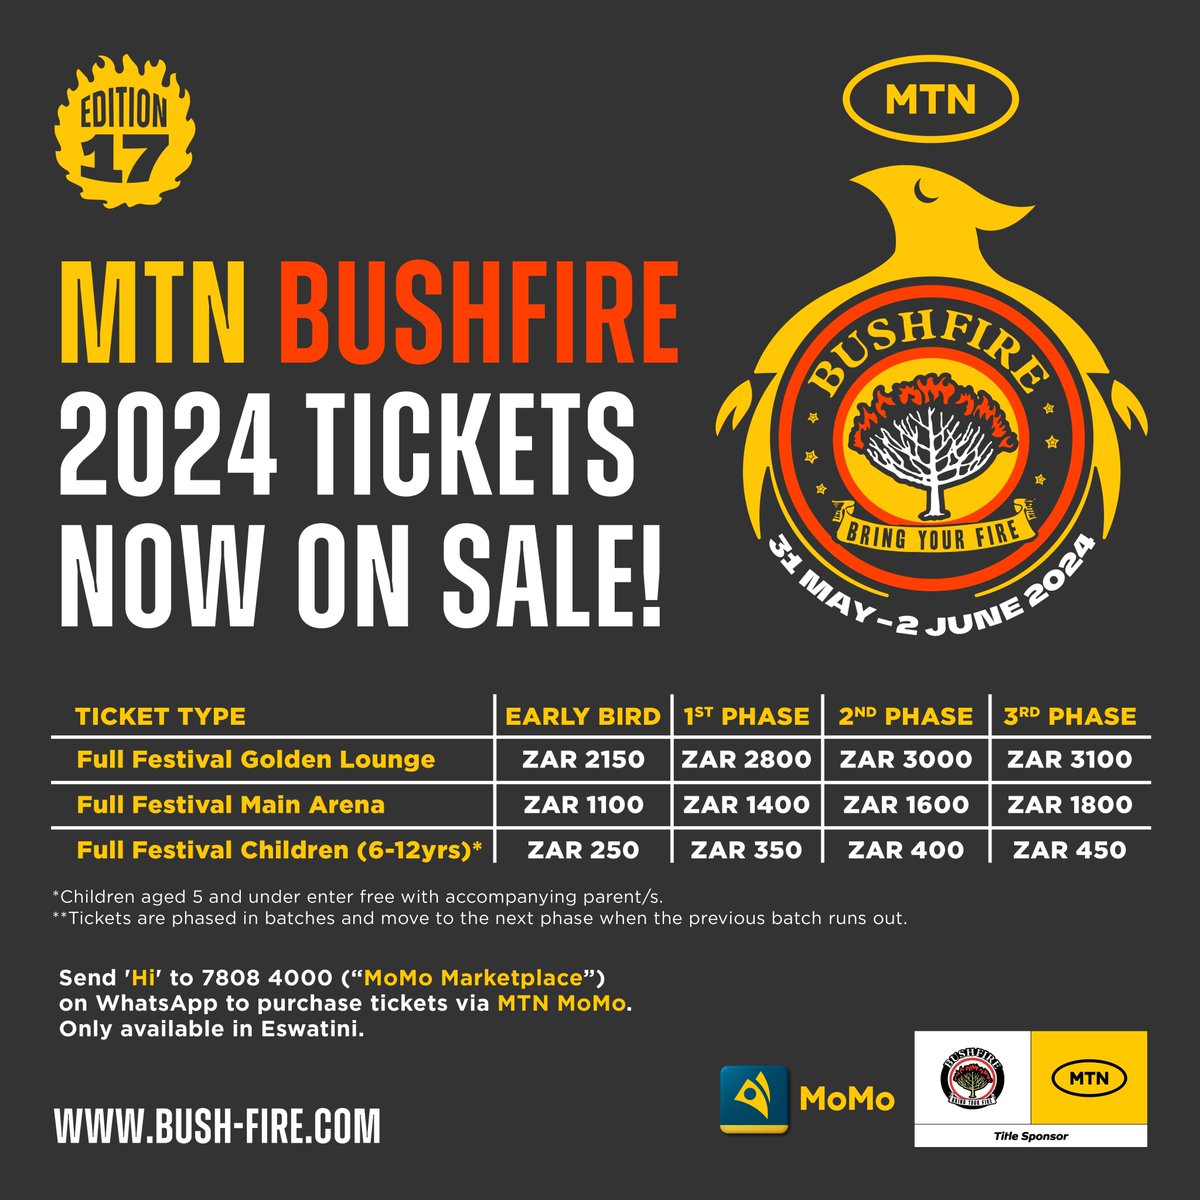 MTN Bushfire tickets now on sale! 🔥 Get your discounted Early Bird tickets through our official website, bush-fire.com, and on MTN Mobile Money - special discount for Eswatini festivalgoers! 😆👊 #BRINGYOURFIRE #MTNBUSHFIRE2024 #REIGNITETHEFIRE